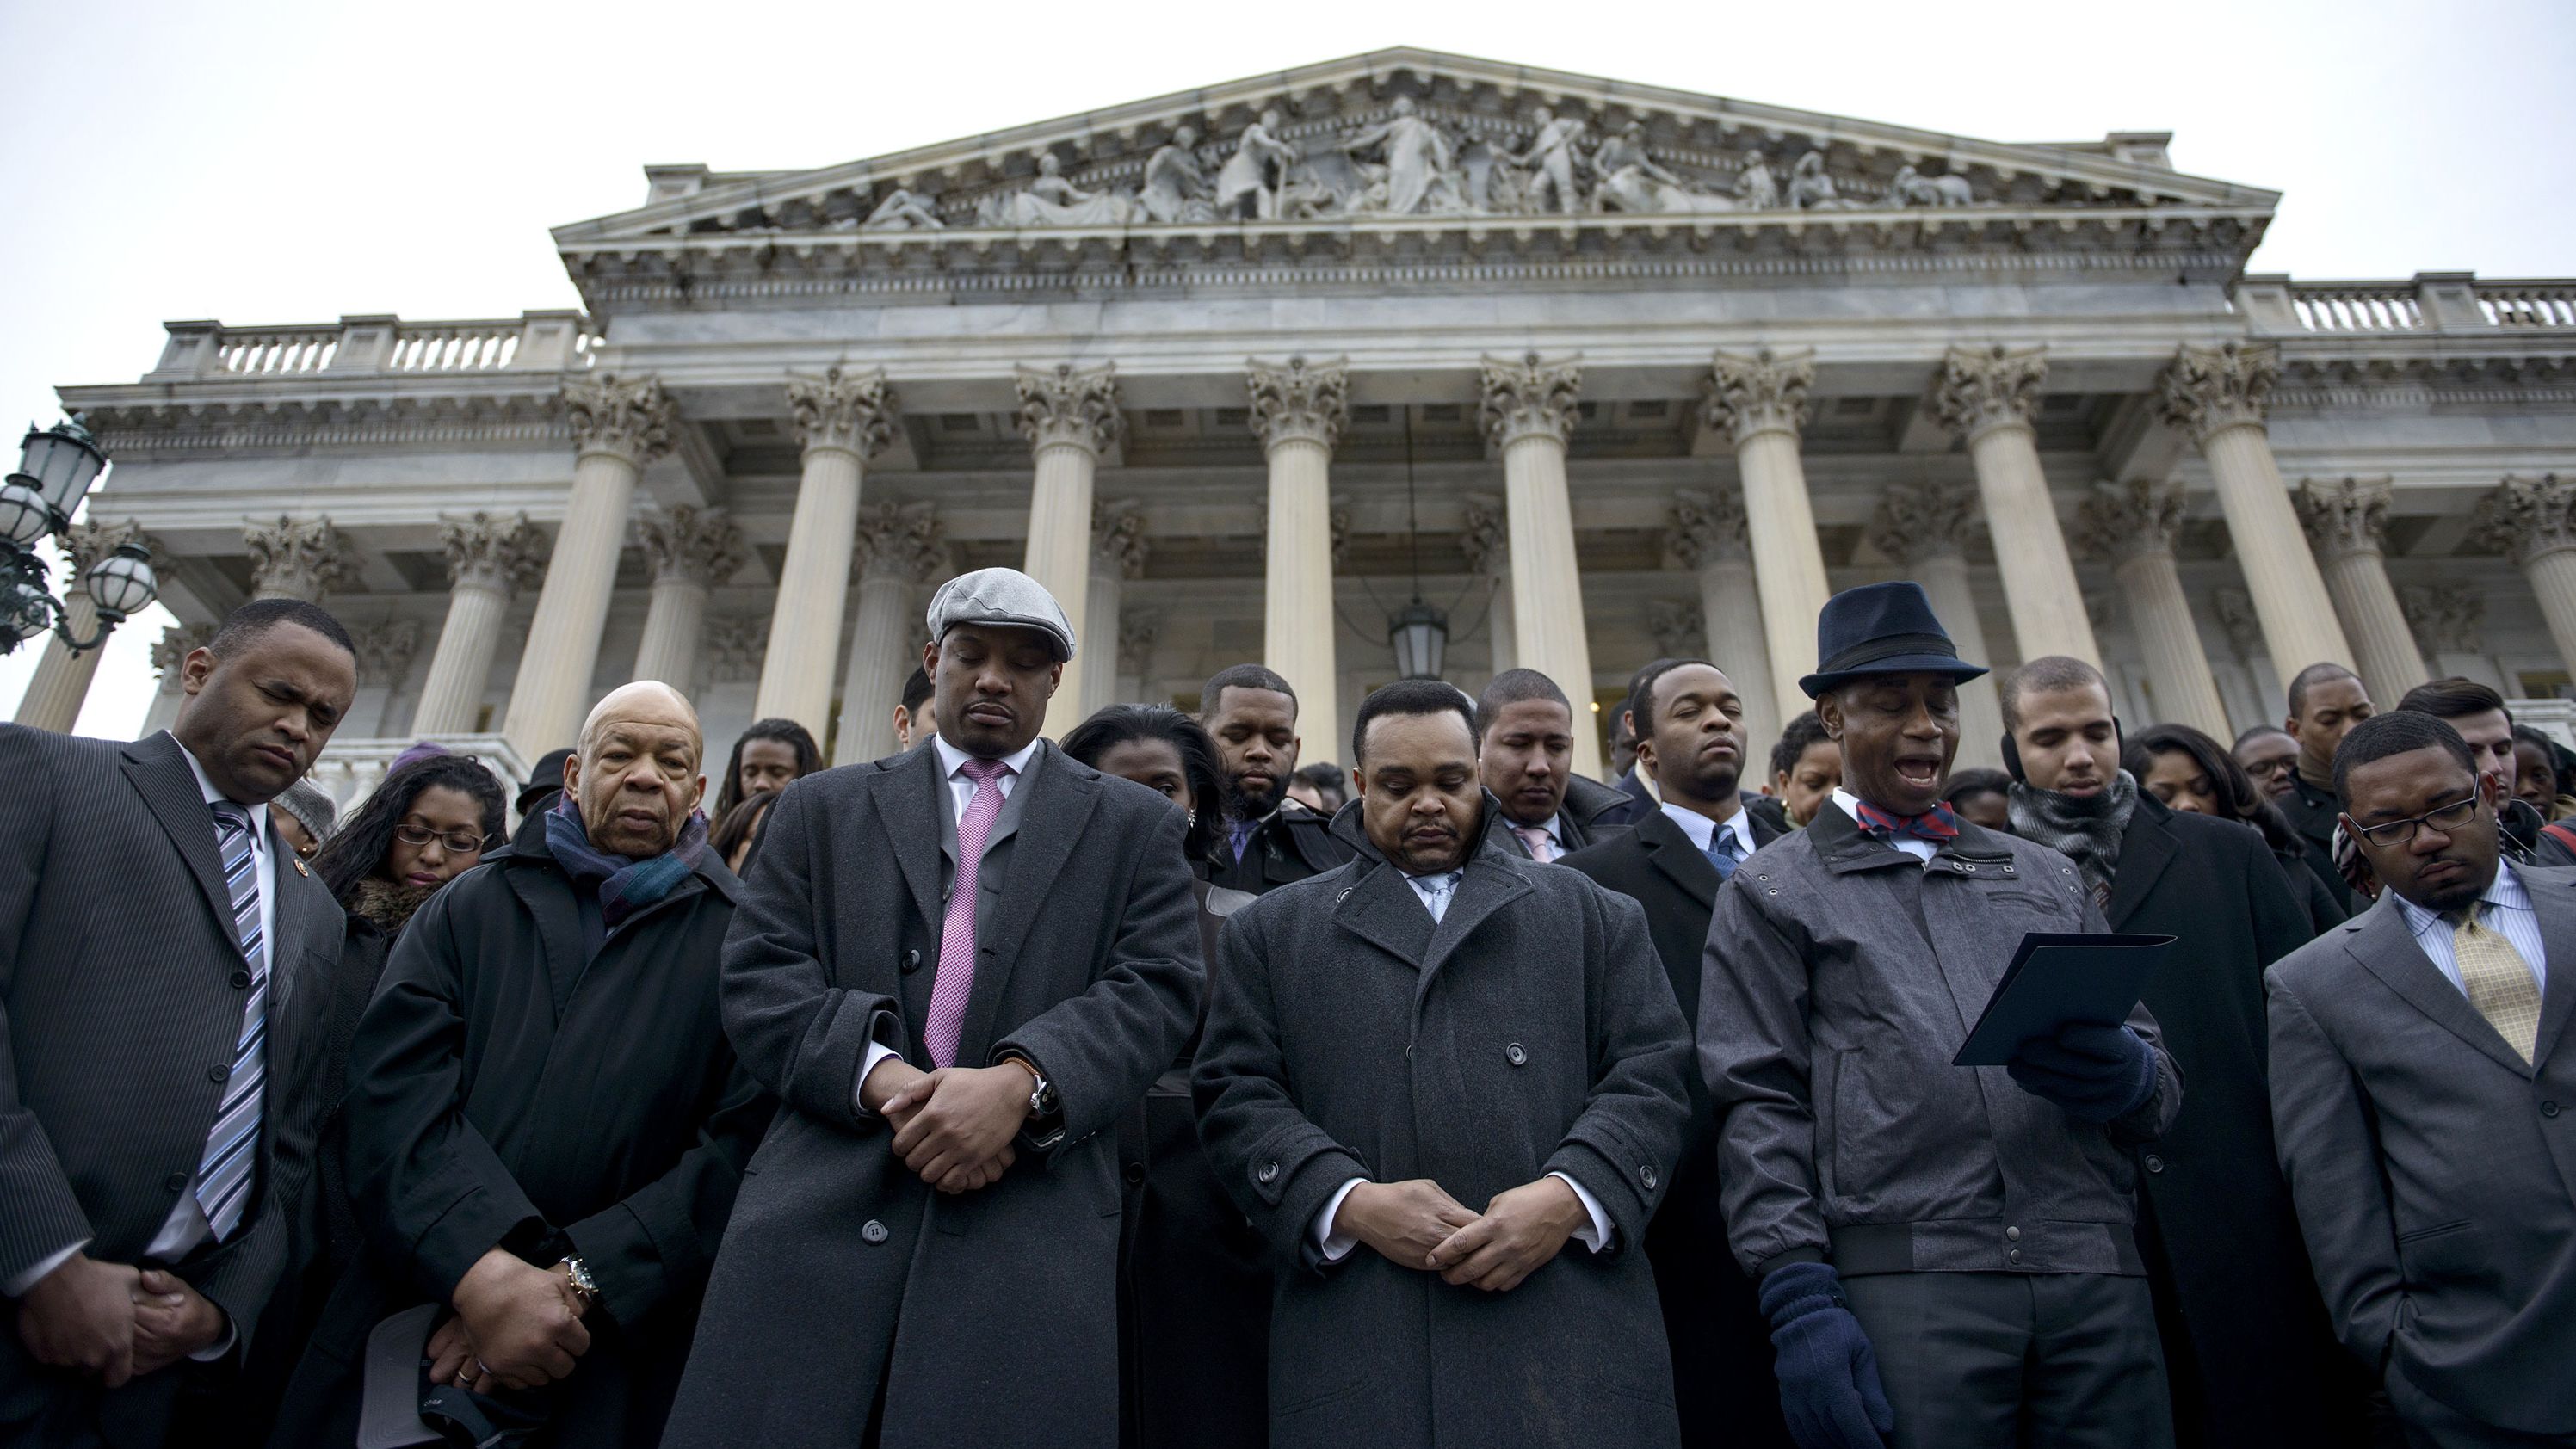 Cummings takes part in a walk-out outside the House of Representatives in December 2014. People gathered to protest the Eric Garner and Michael Brown grand jury decisions, which did not bring charges against the police officers involved in their deaths.